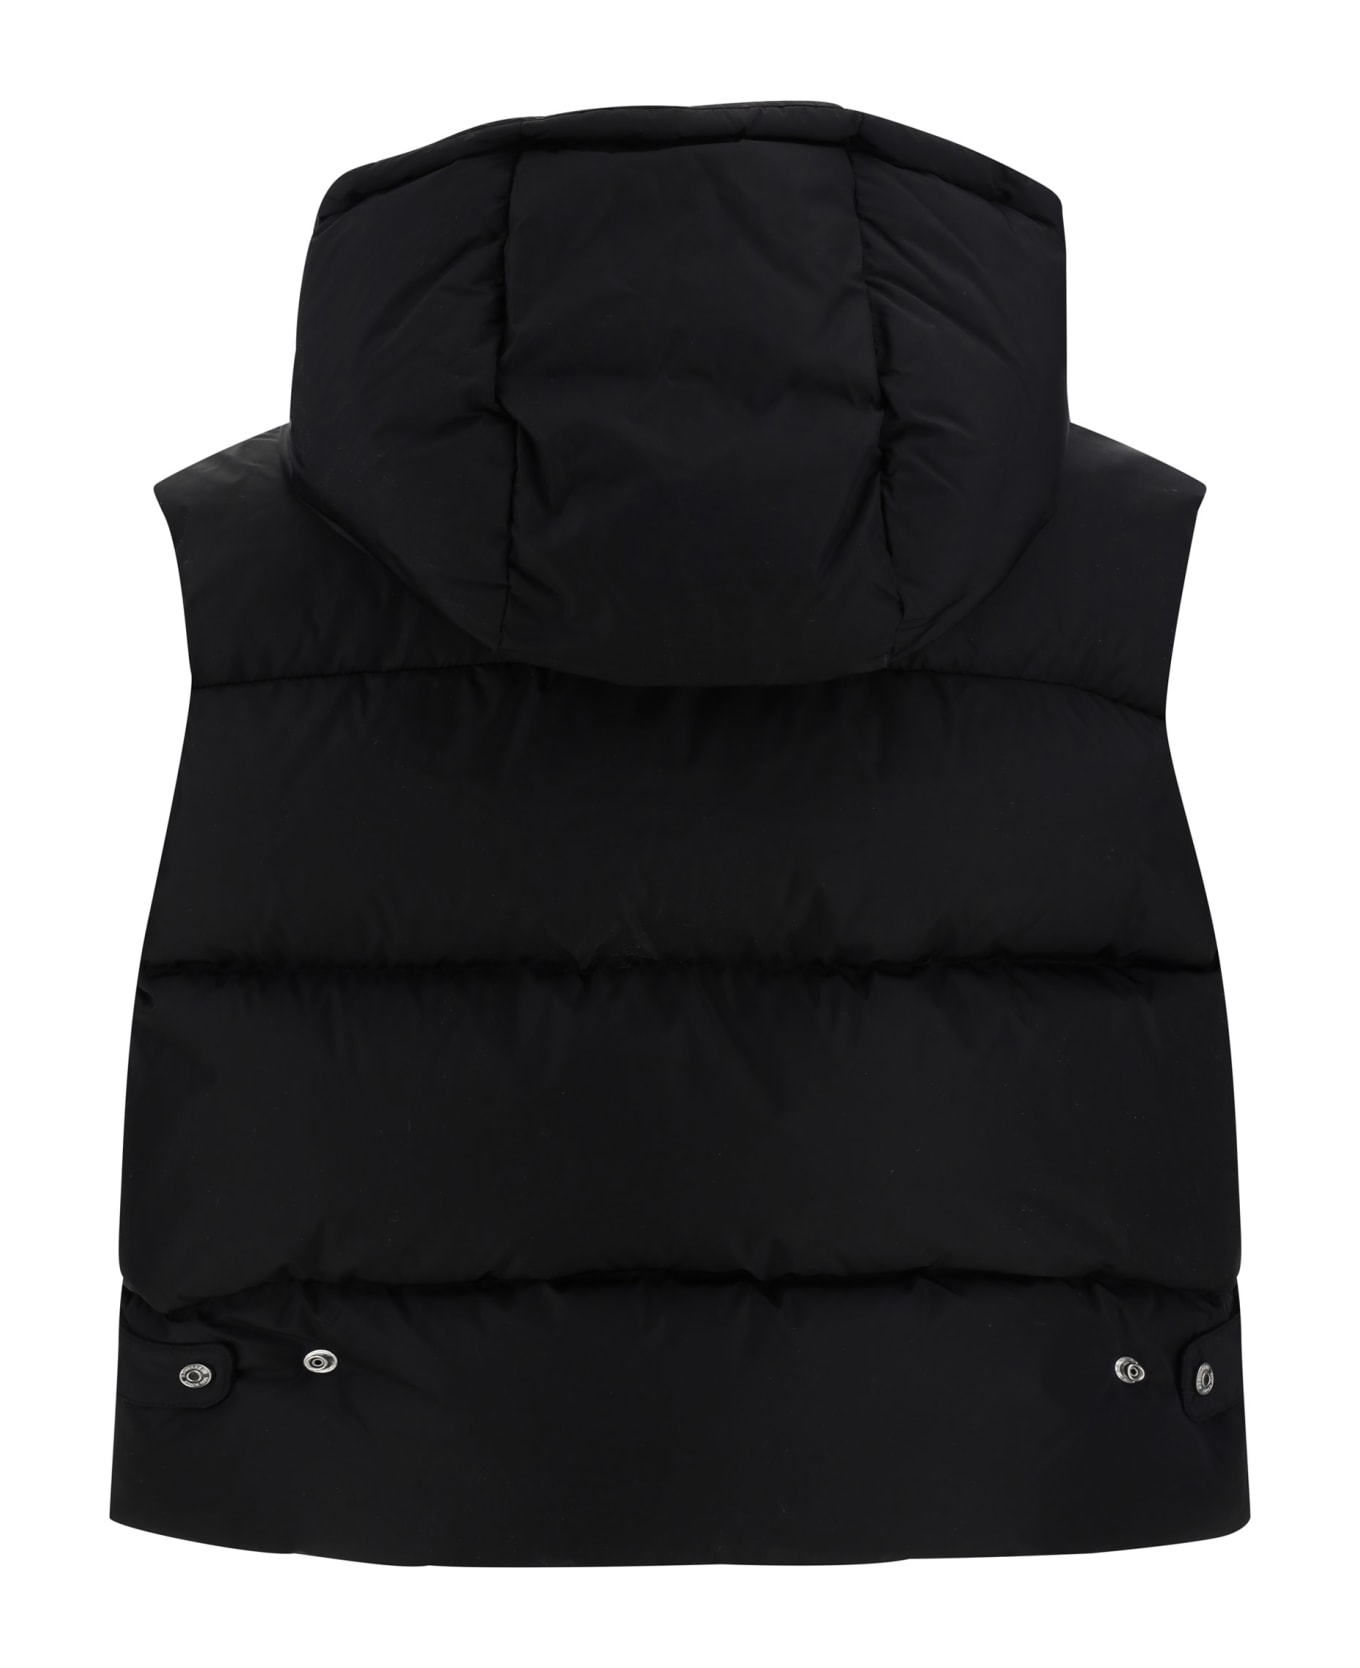 Dsquared2 Down Jacket - 900